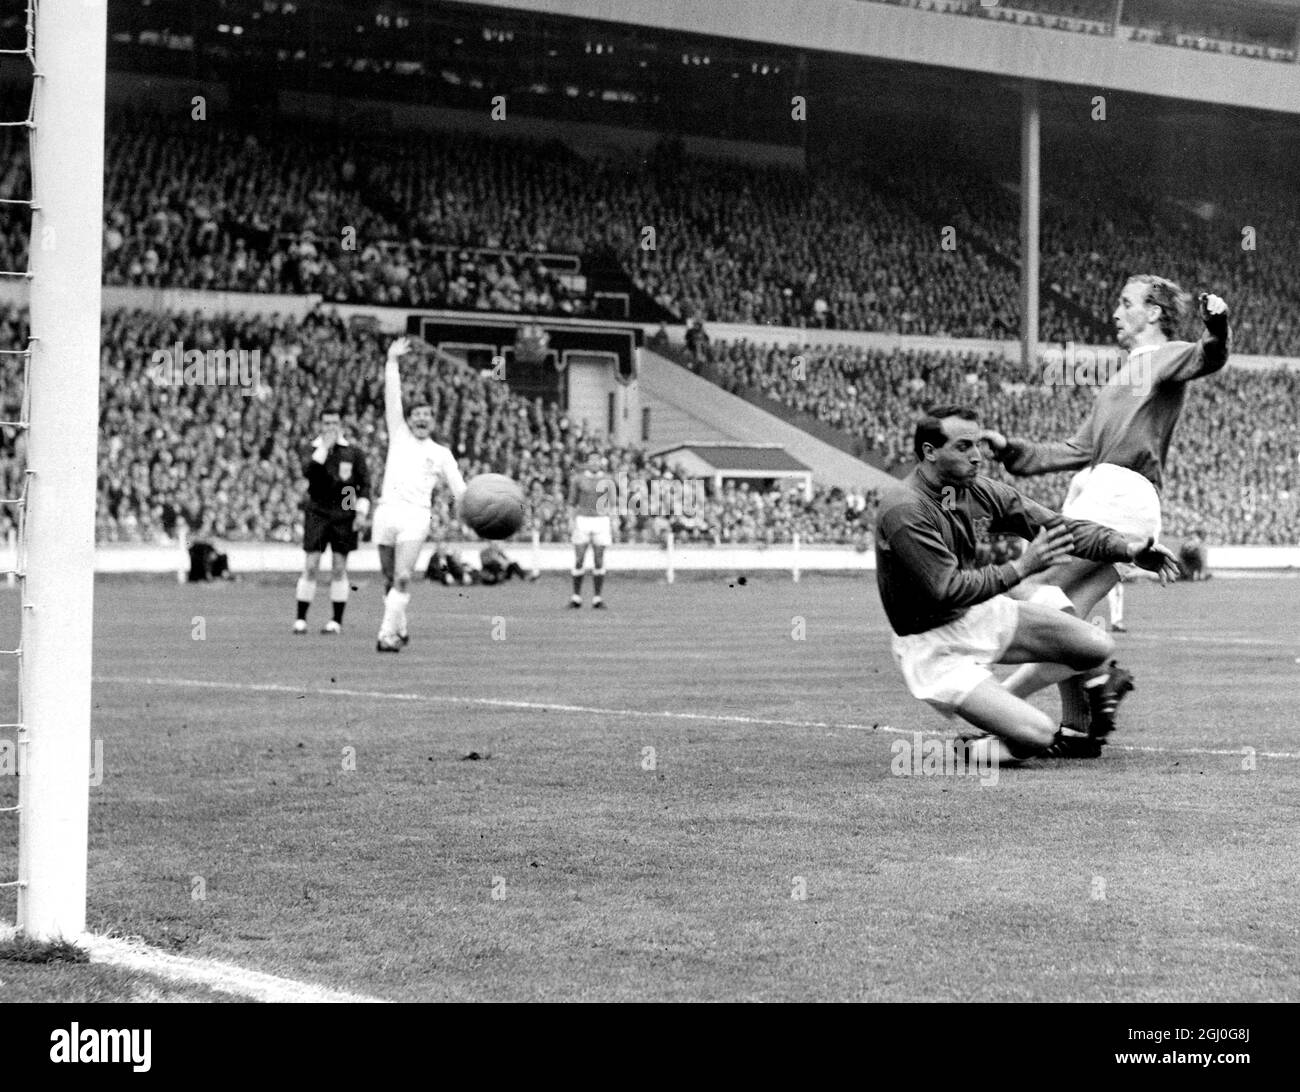 The sheffield wednesday forward Black and White Stock Photos & Images ...